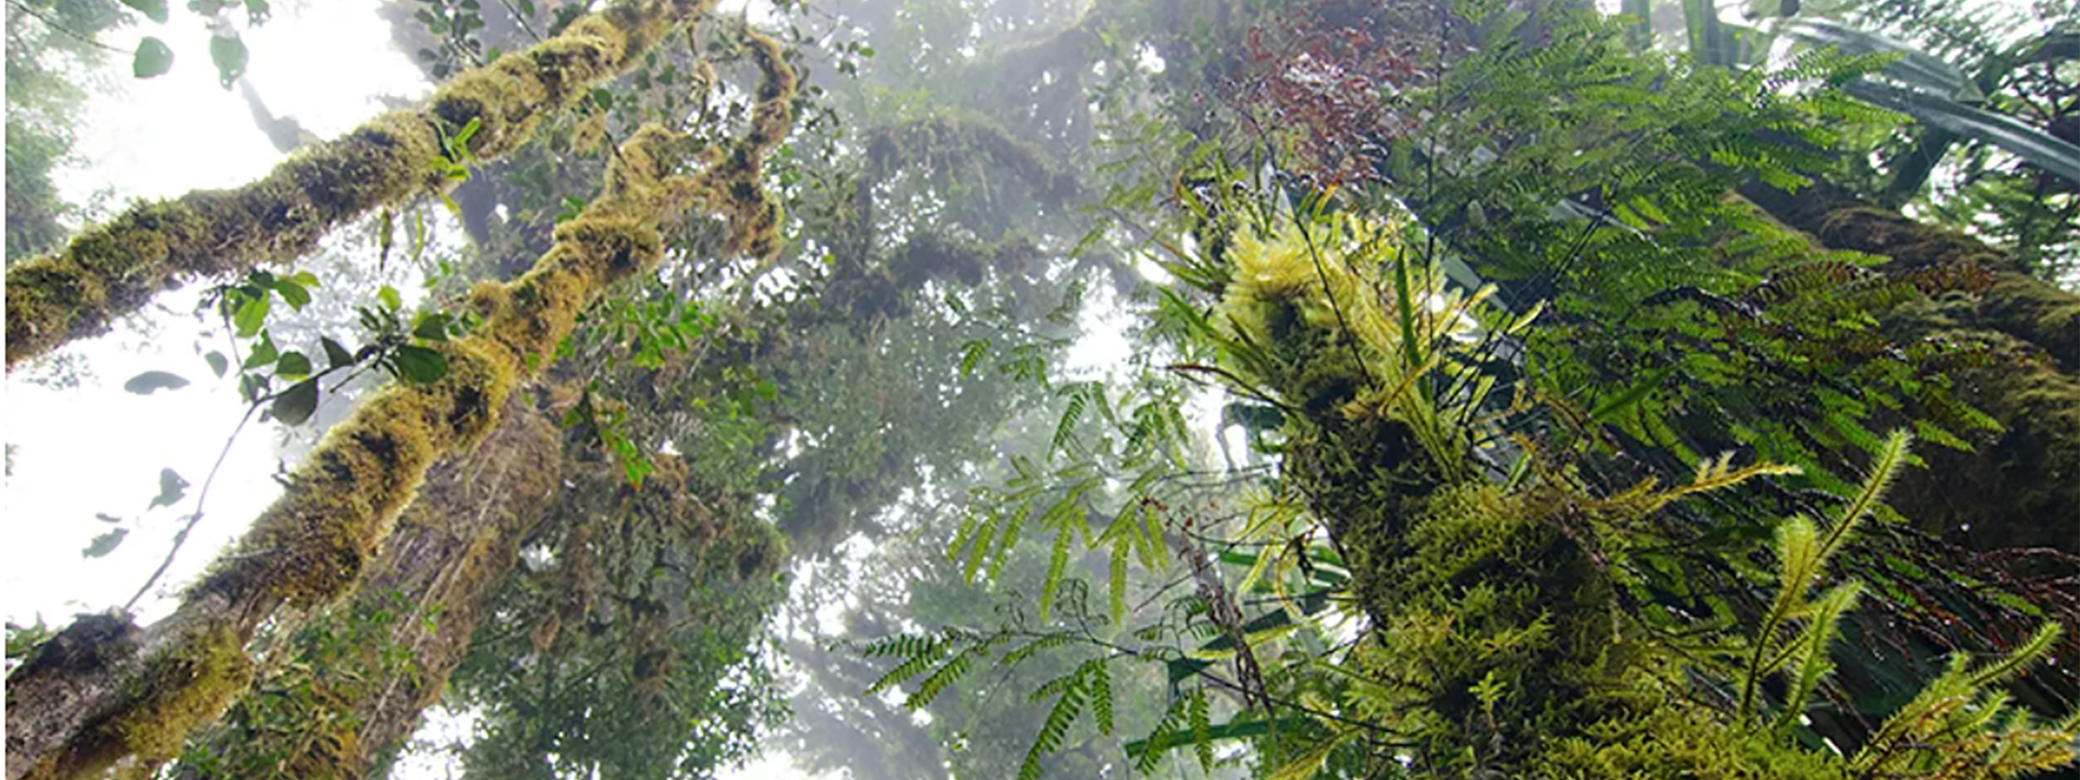 Papua New Guinea cloud forest, view looking up at tall trees